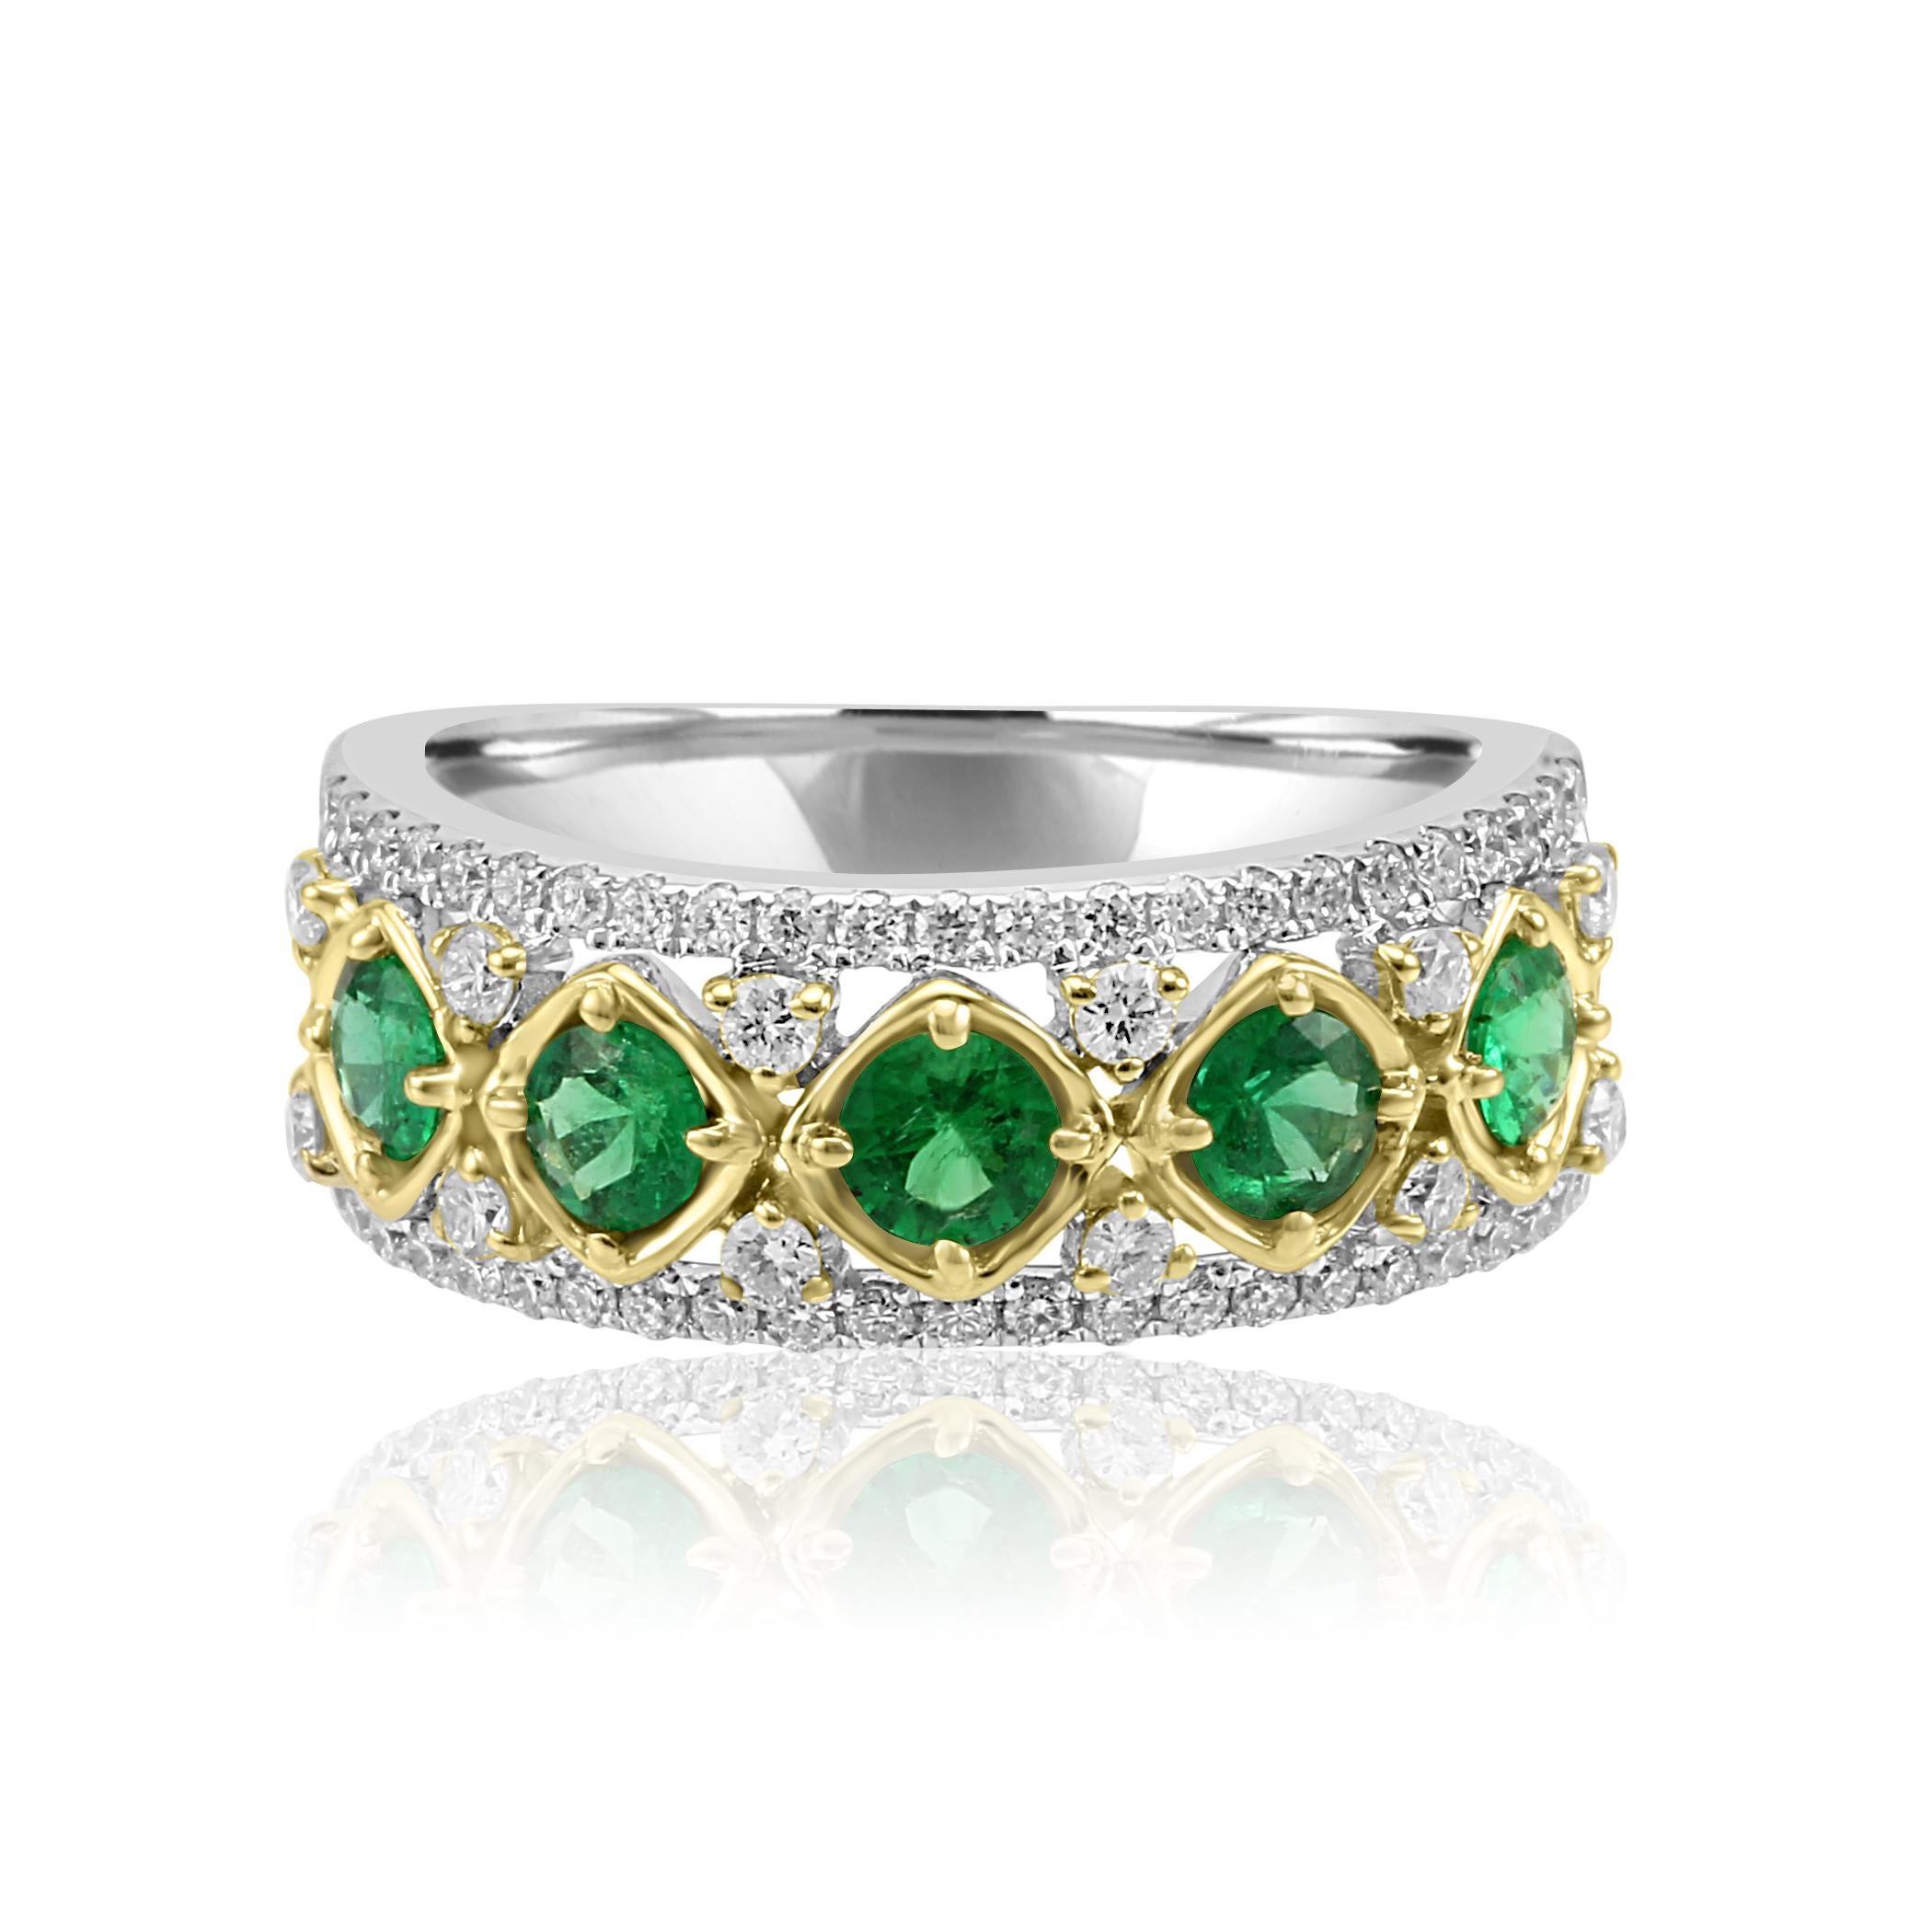 Gorgeous 5 Round Emeralds 0.70 Carat flanked by White G-H Color  Si Clarity Diamond Rounds 0.50 Carat in 14K White and Yellow Gold Cocktail Band Ring.

Total Stones Weight 1.20

Style available in different price ranges, can be customized or custom